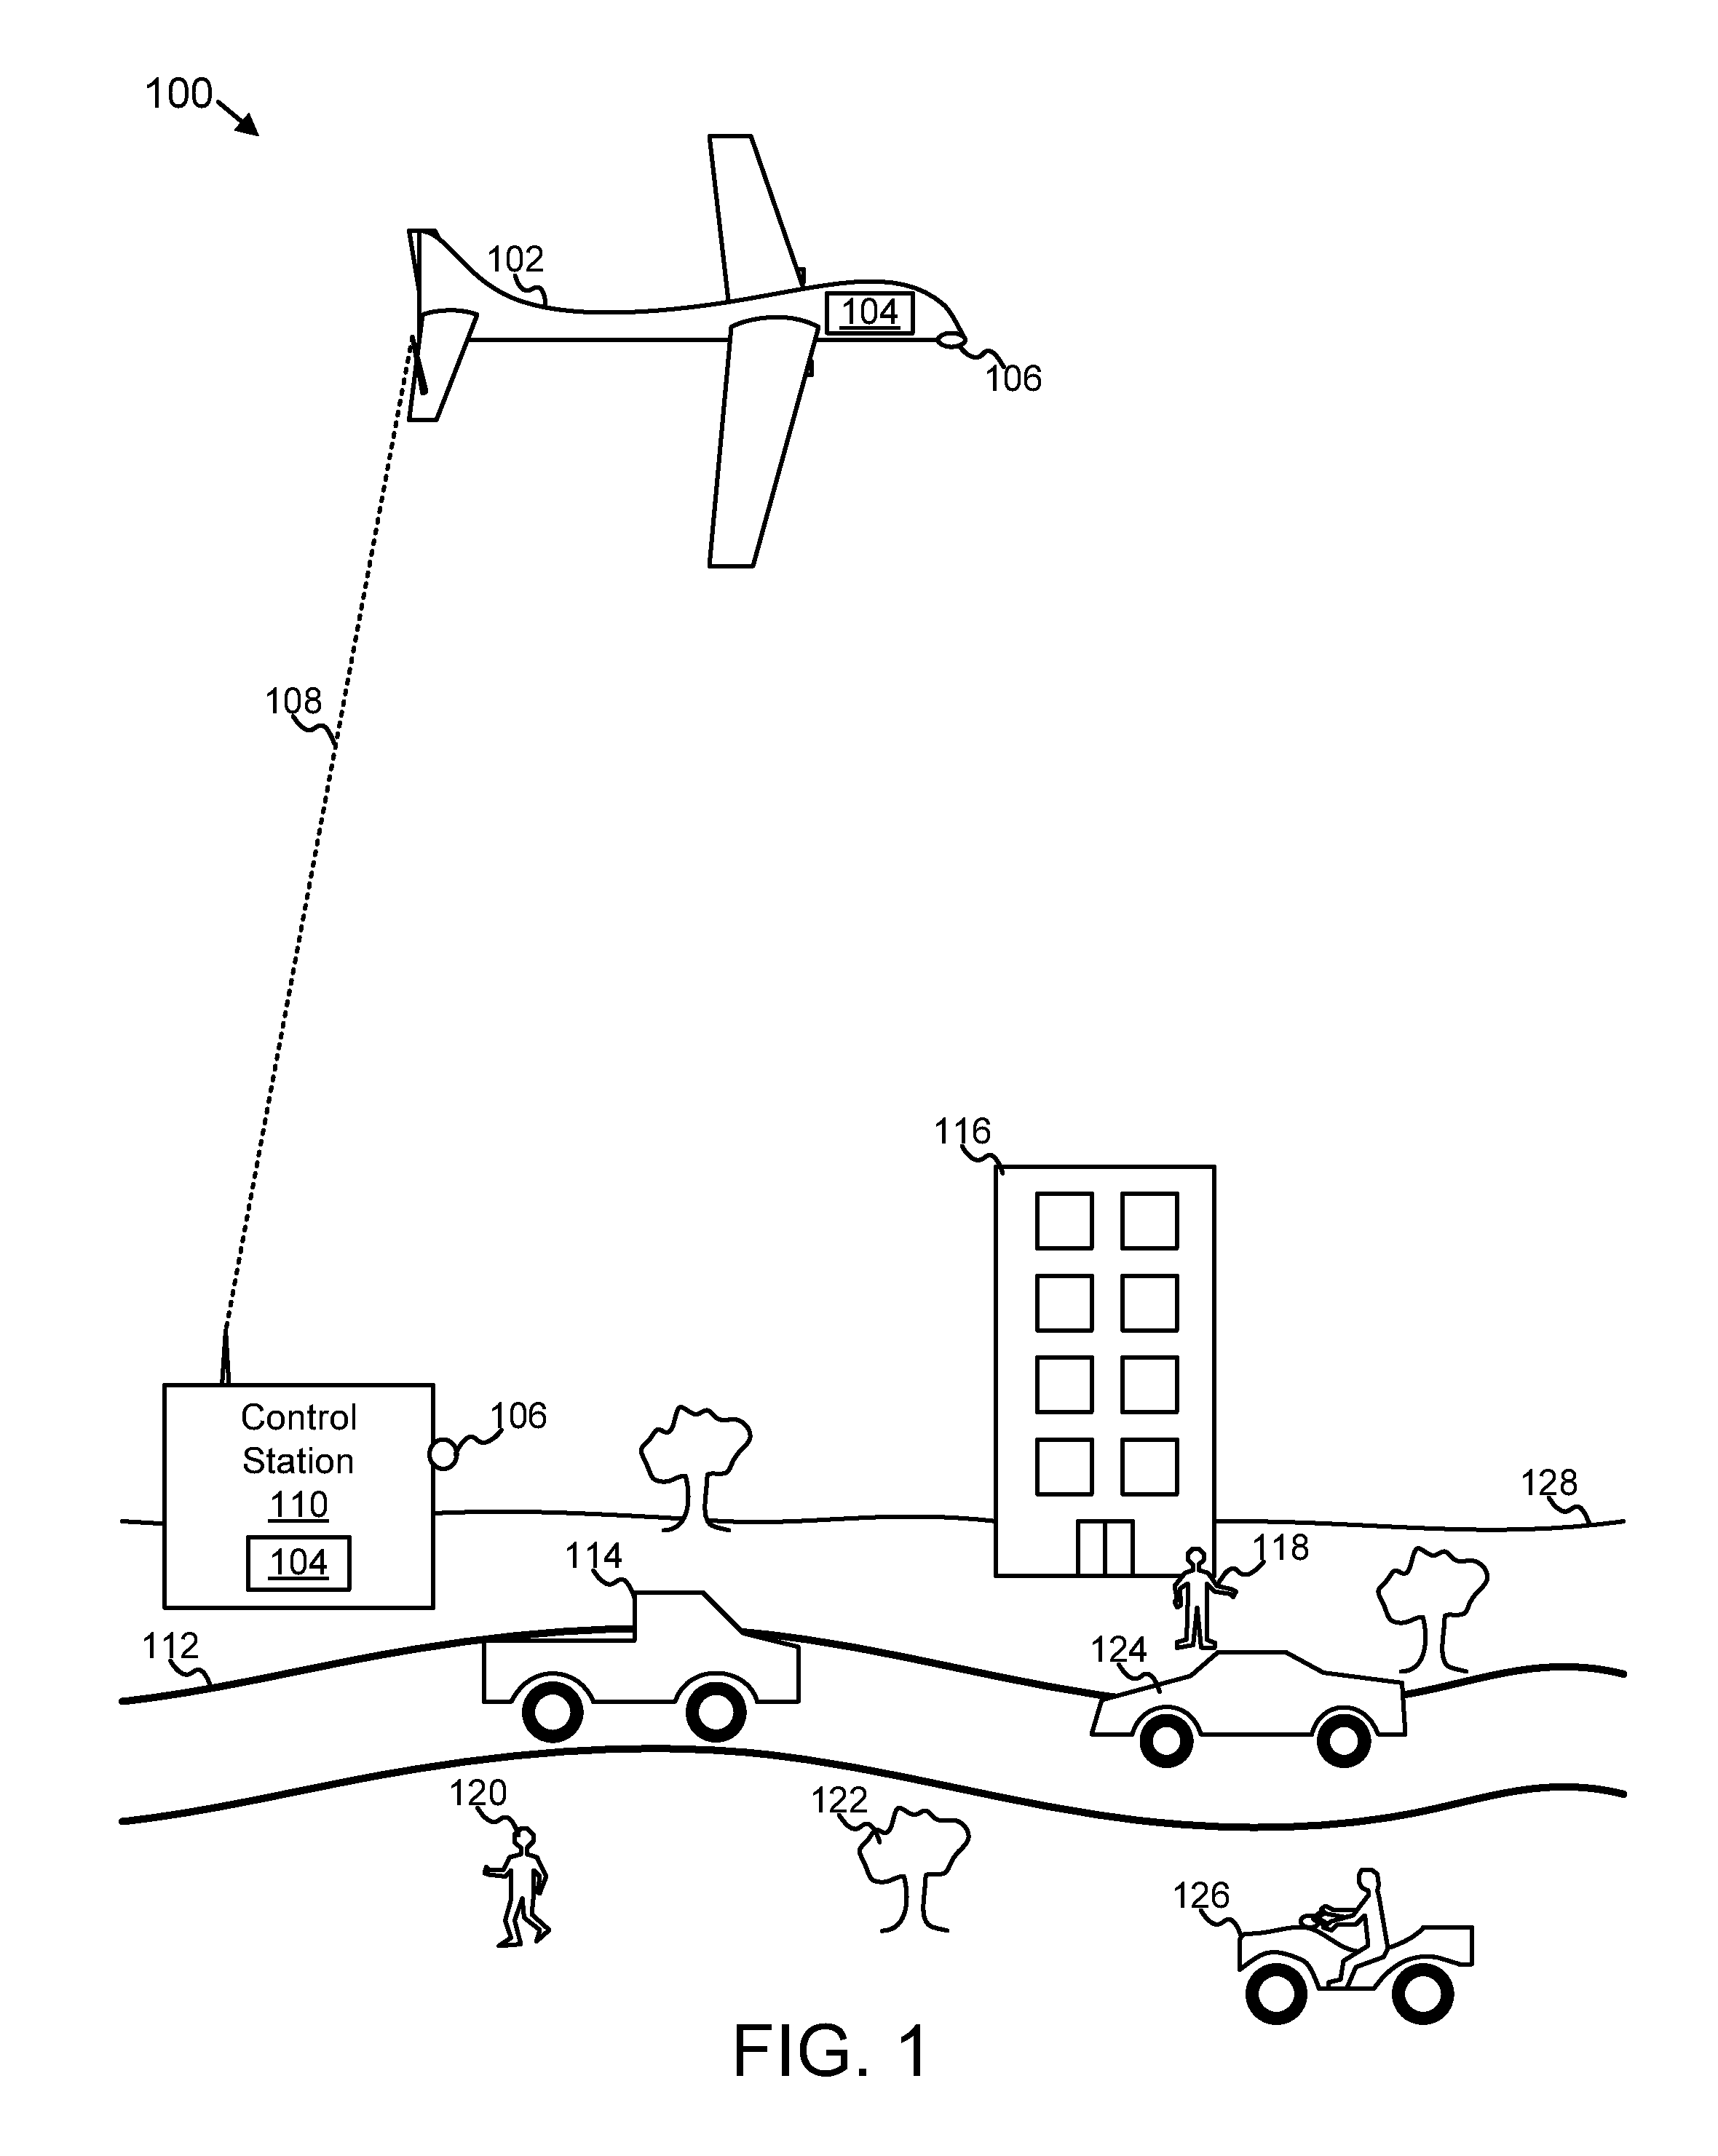 Apparatus, system, and method for object detection and identification